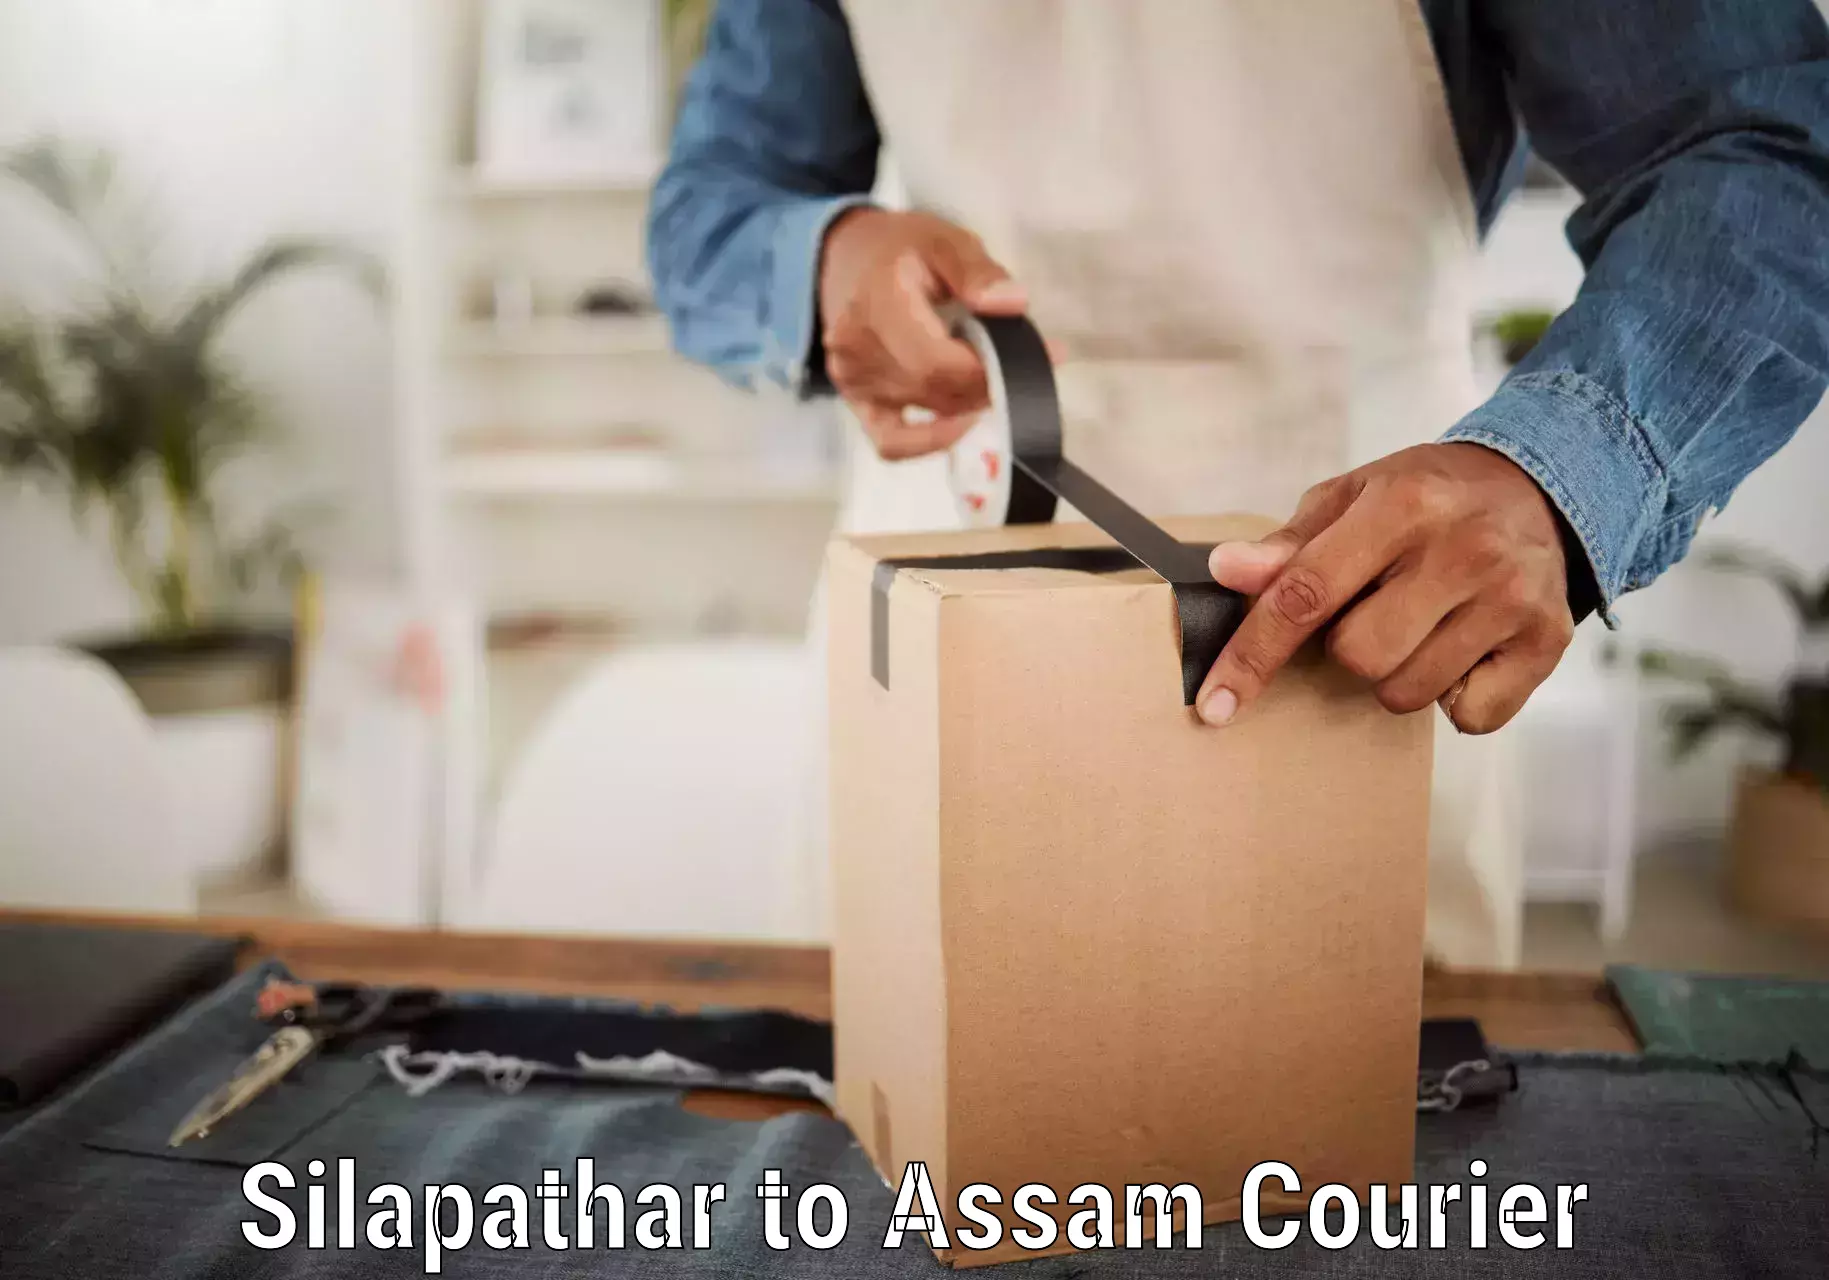 Lightweight parcel options Silapathar to Jorhat